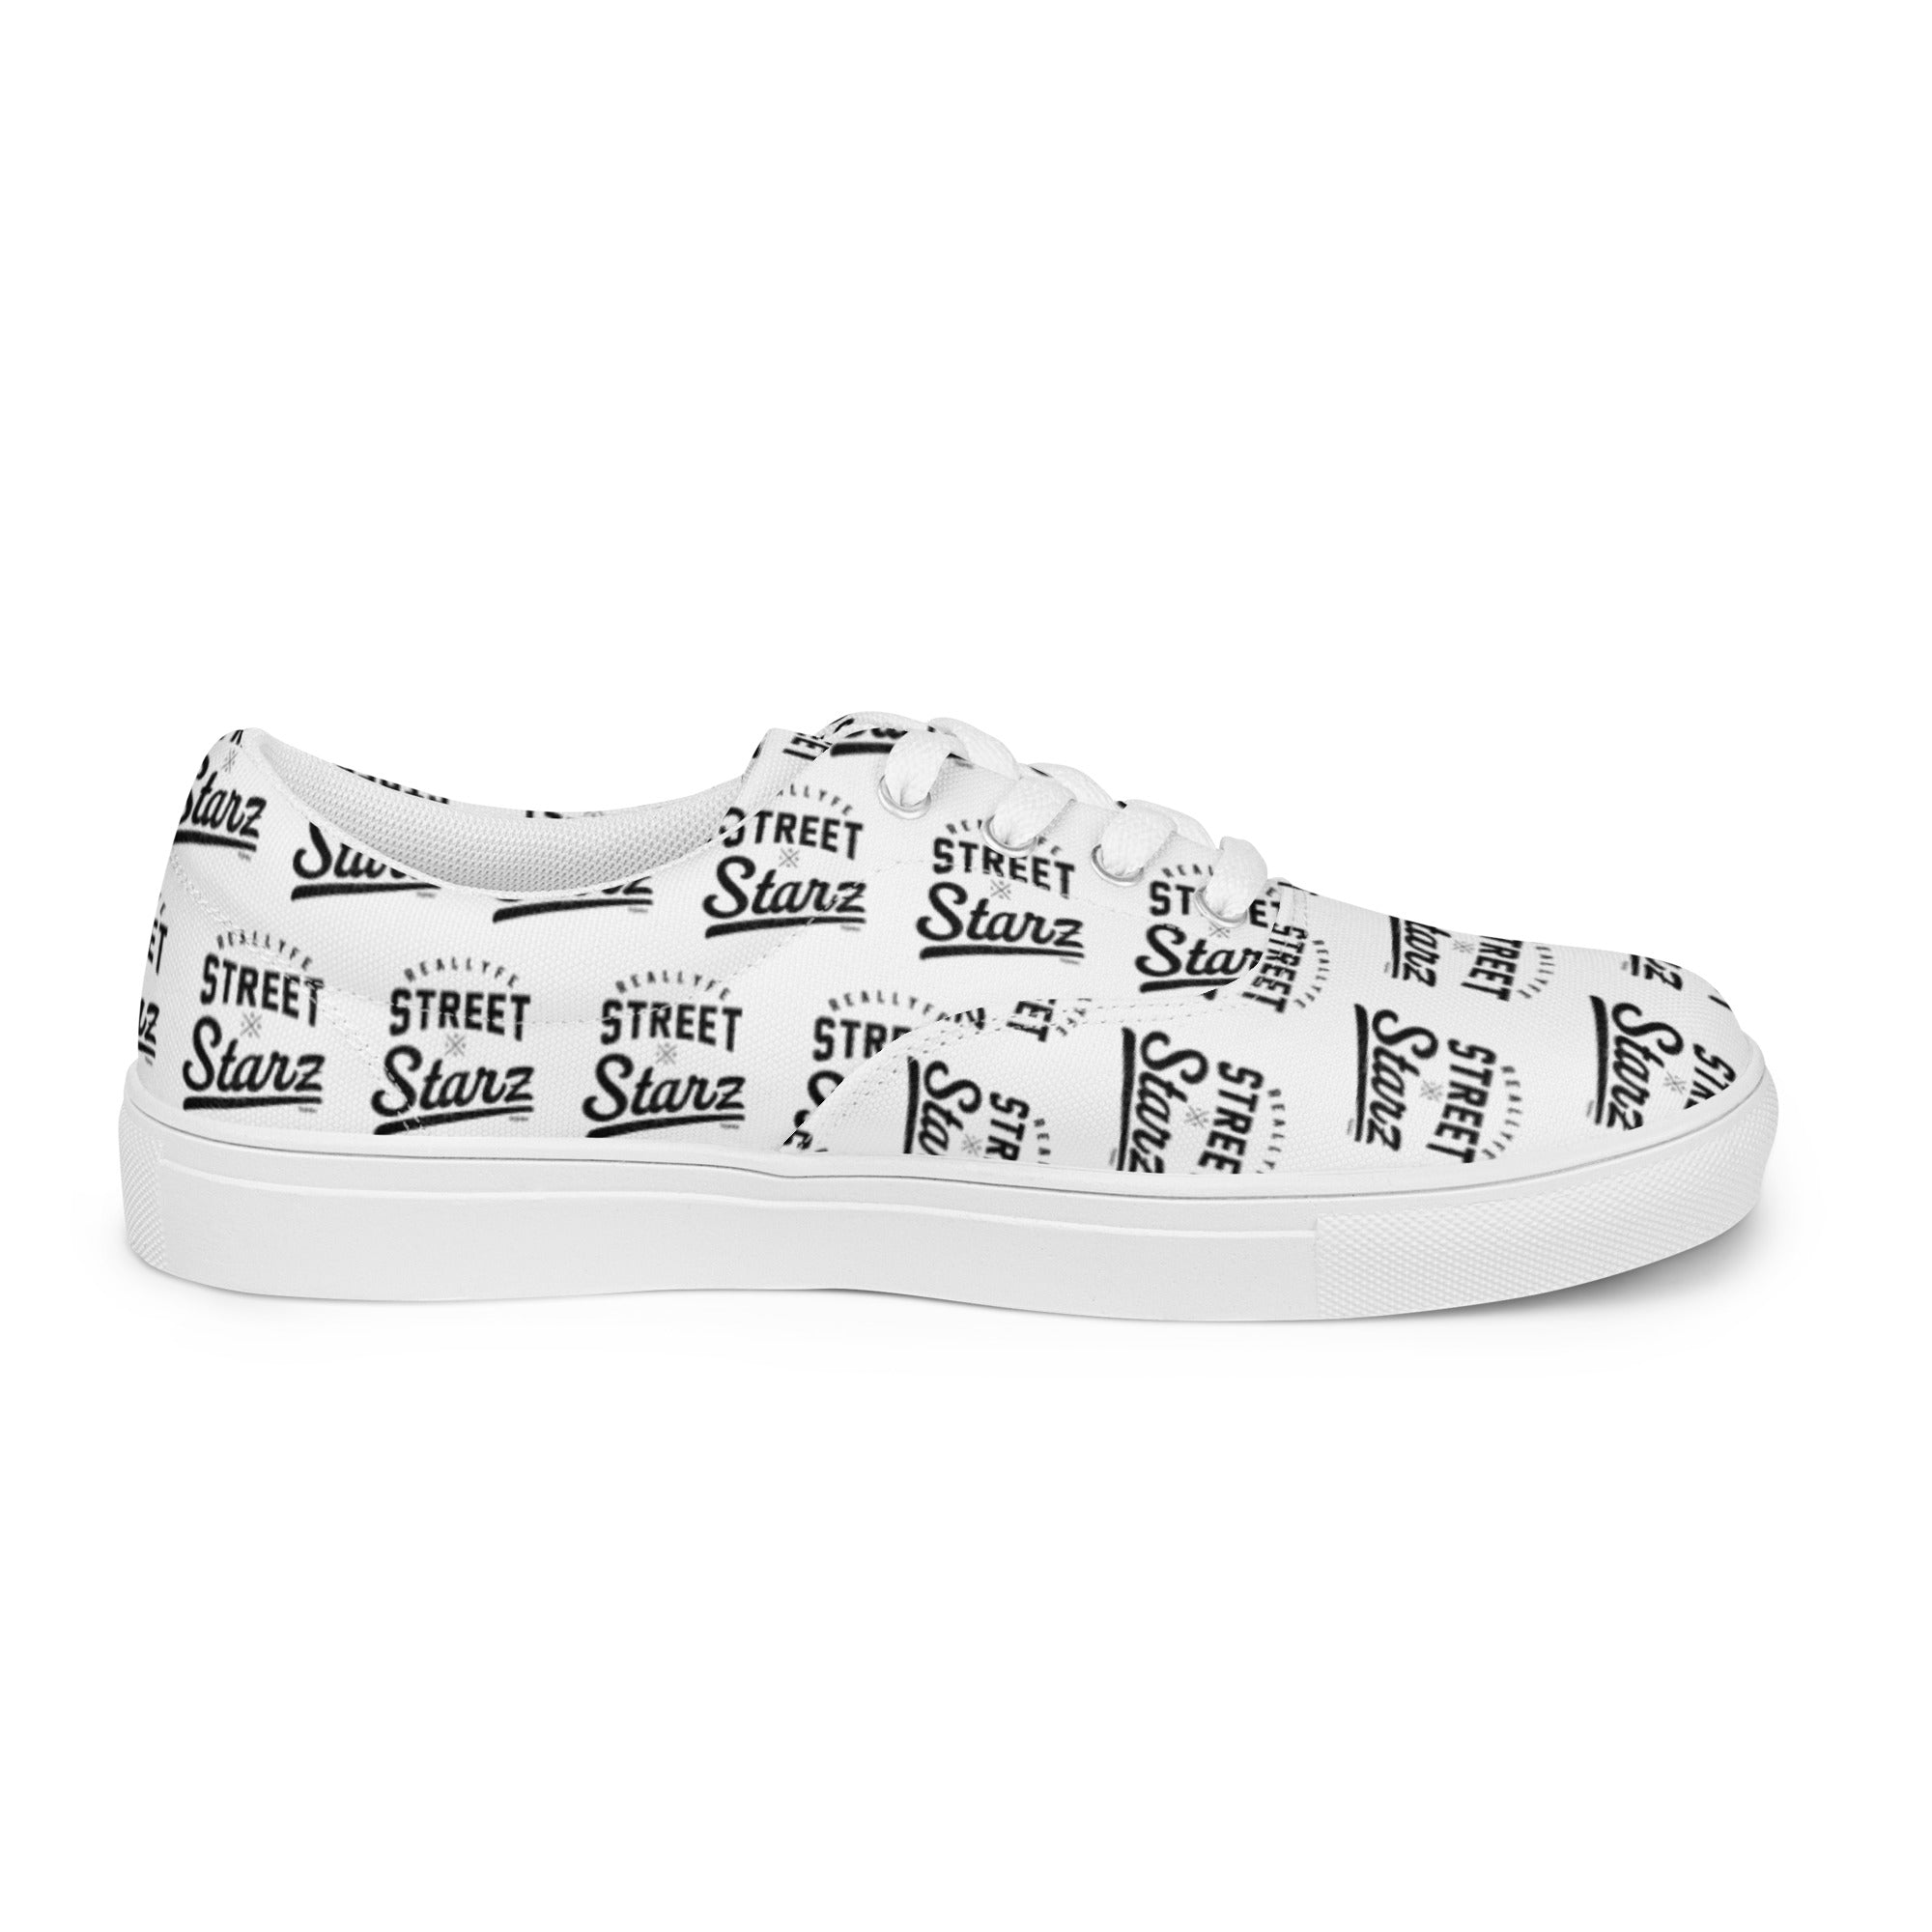 Reallyfe Street Starz Men’s lace-up canvas shoes